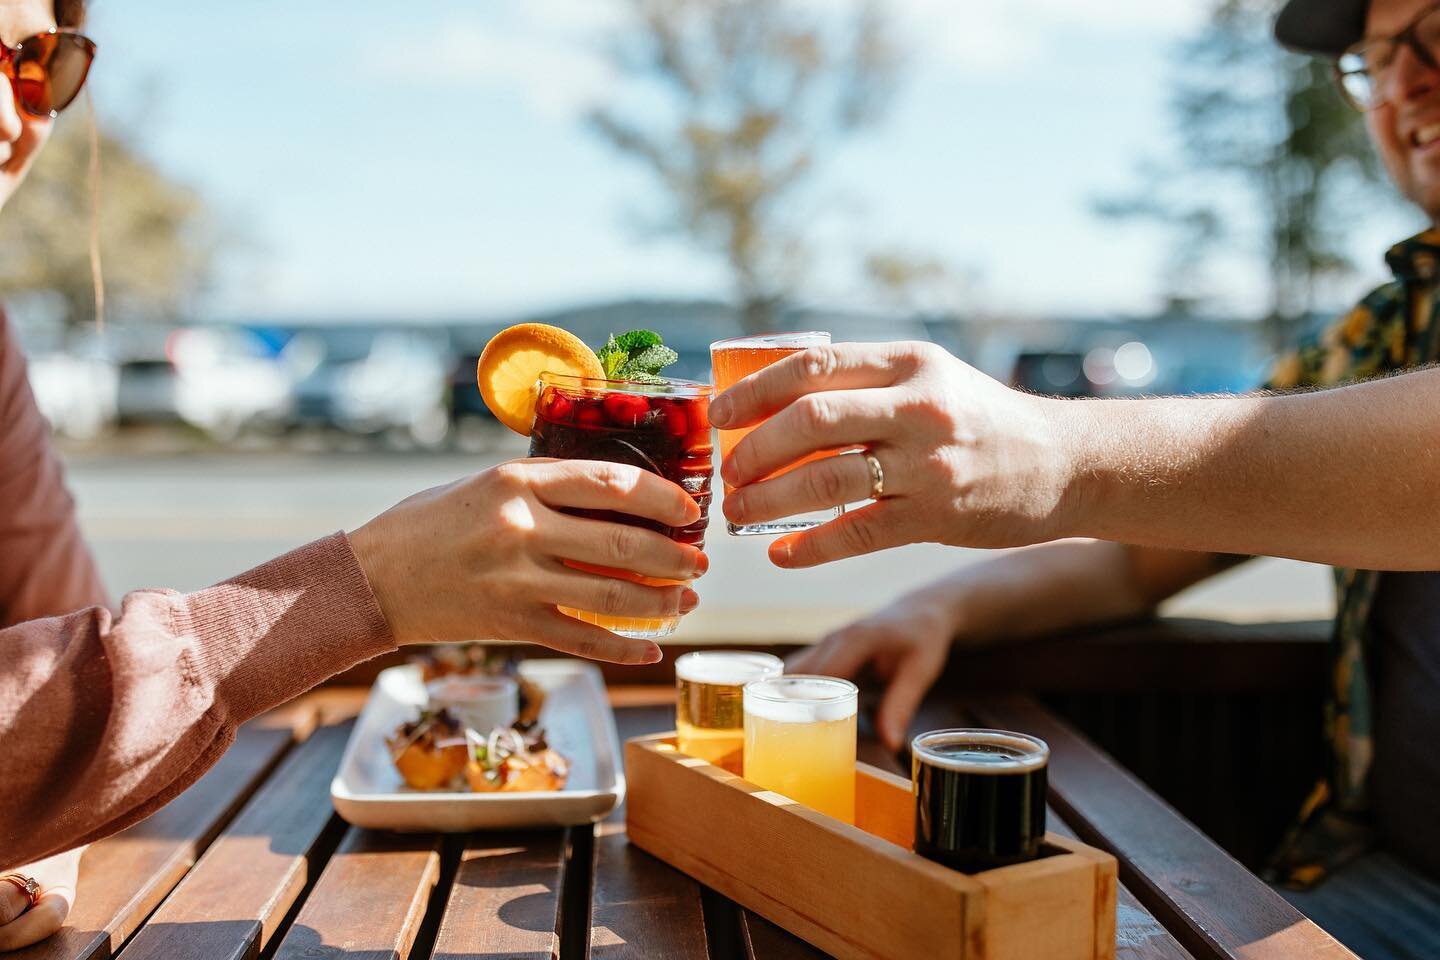 Happy Friday everyone! It's finally a beautiful day and our patio is open! Come enjoy the sunshine with us while you sip on your favorite drink and indulge in some delicious bites.

There's nothing better than kicking off the weekend with good compan